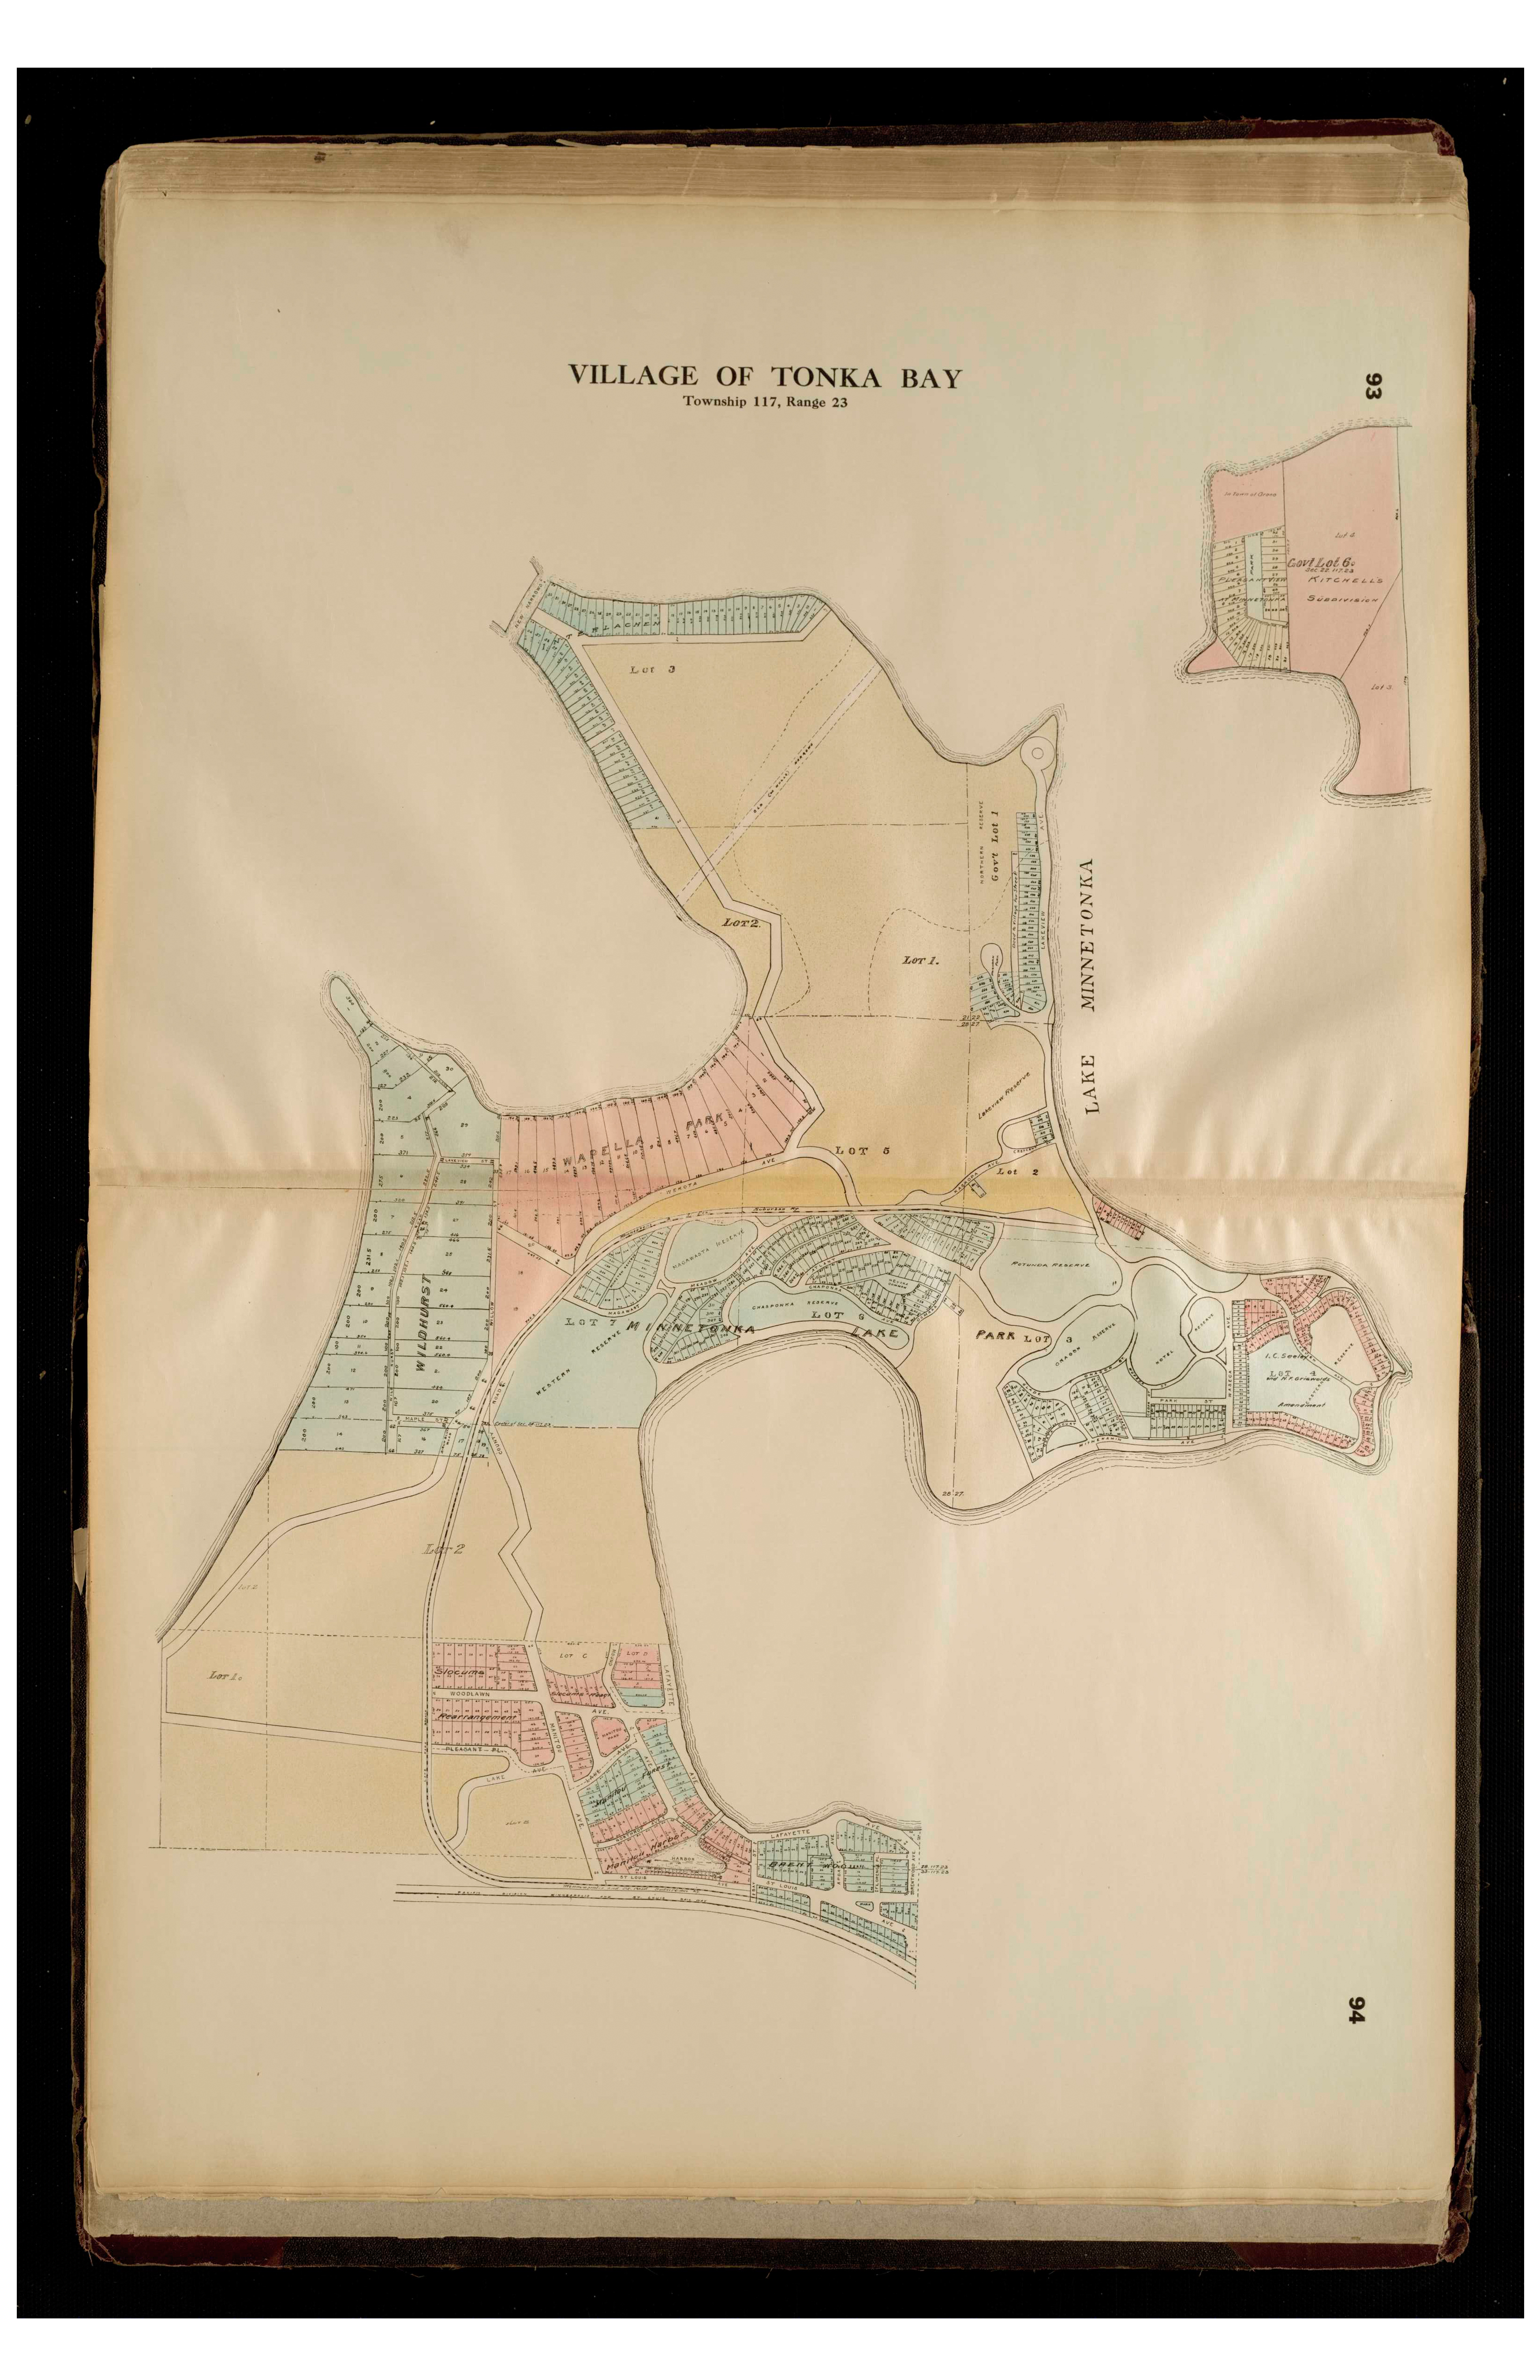 Digitized Plat Maps and Atlases · University of Minnesota Libraries